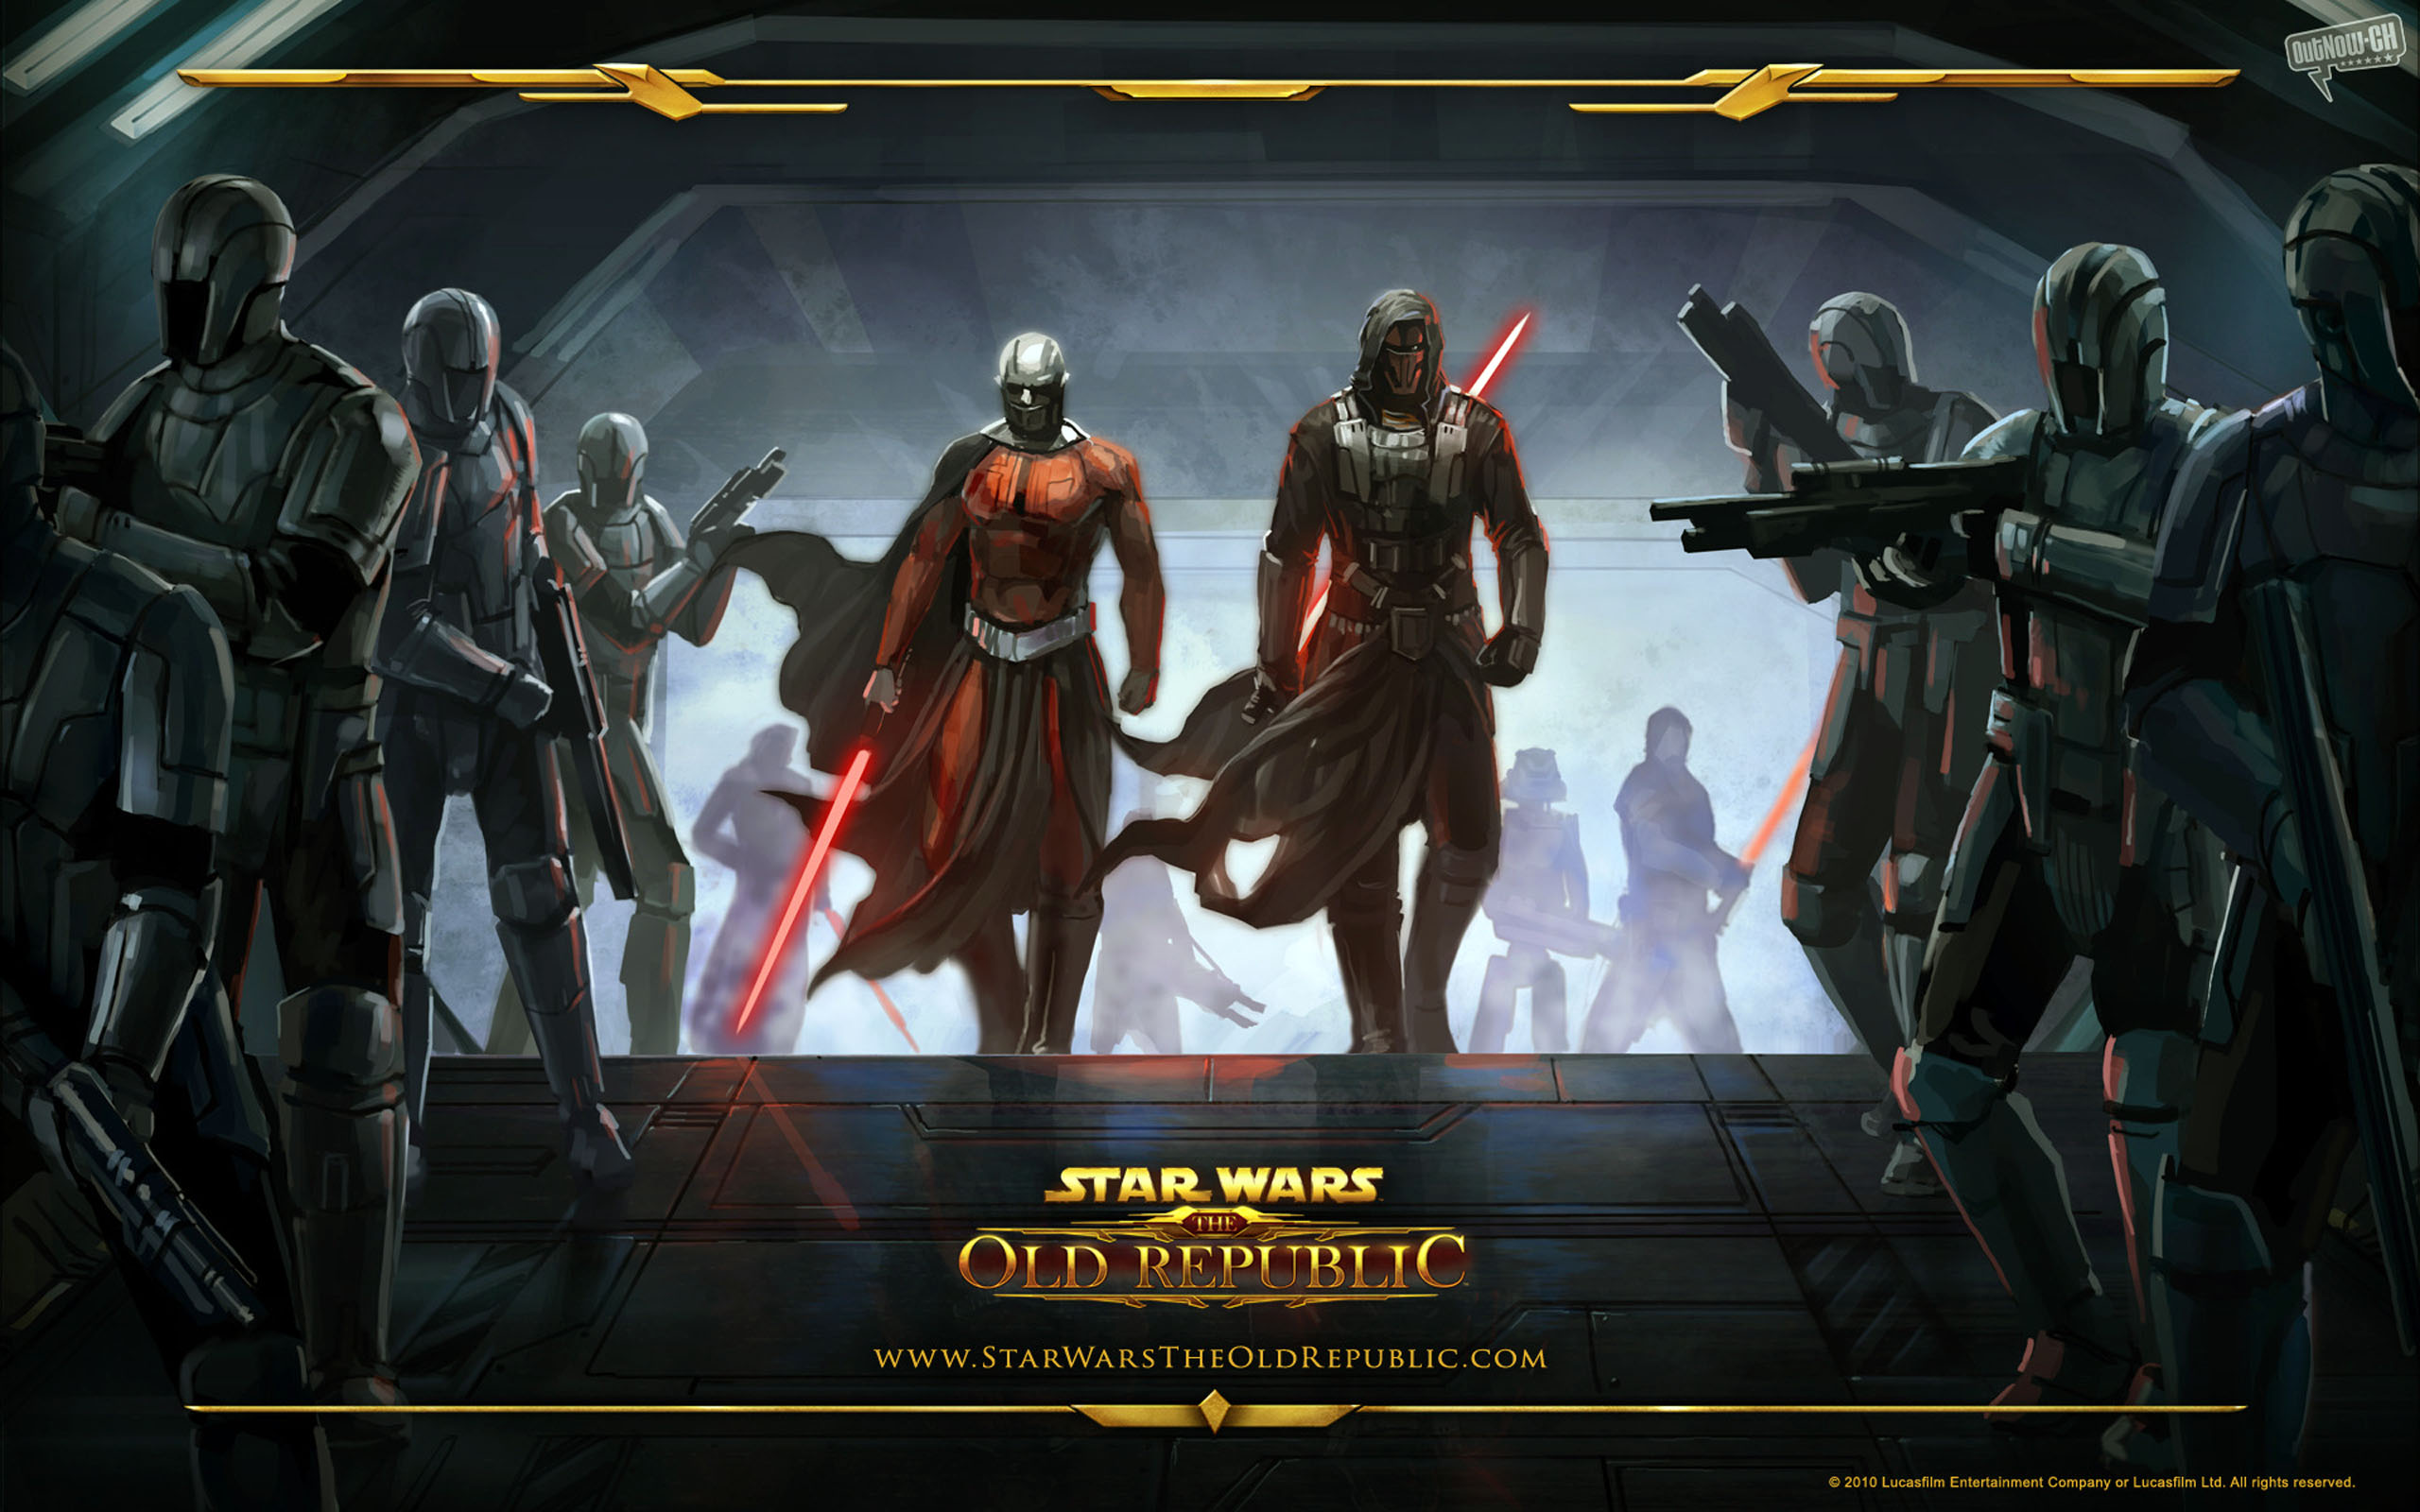 Wars: The Old Republic Sith Warrior wallpaper